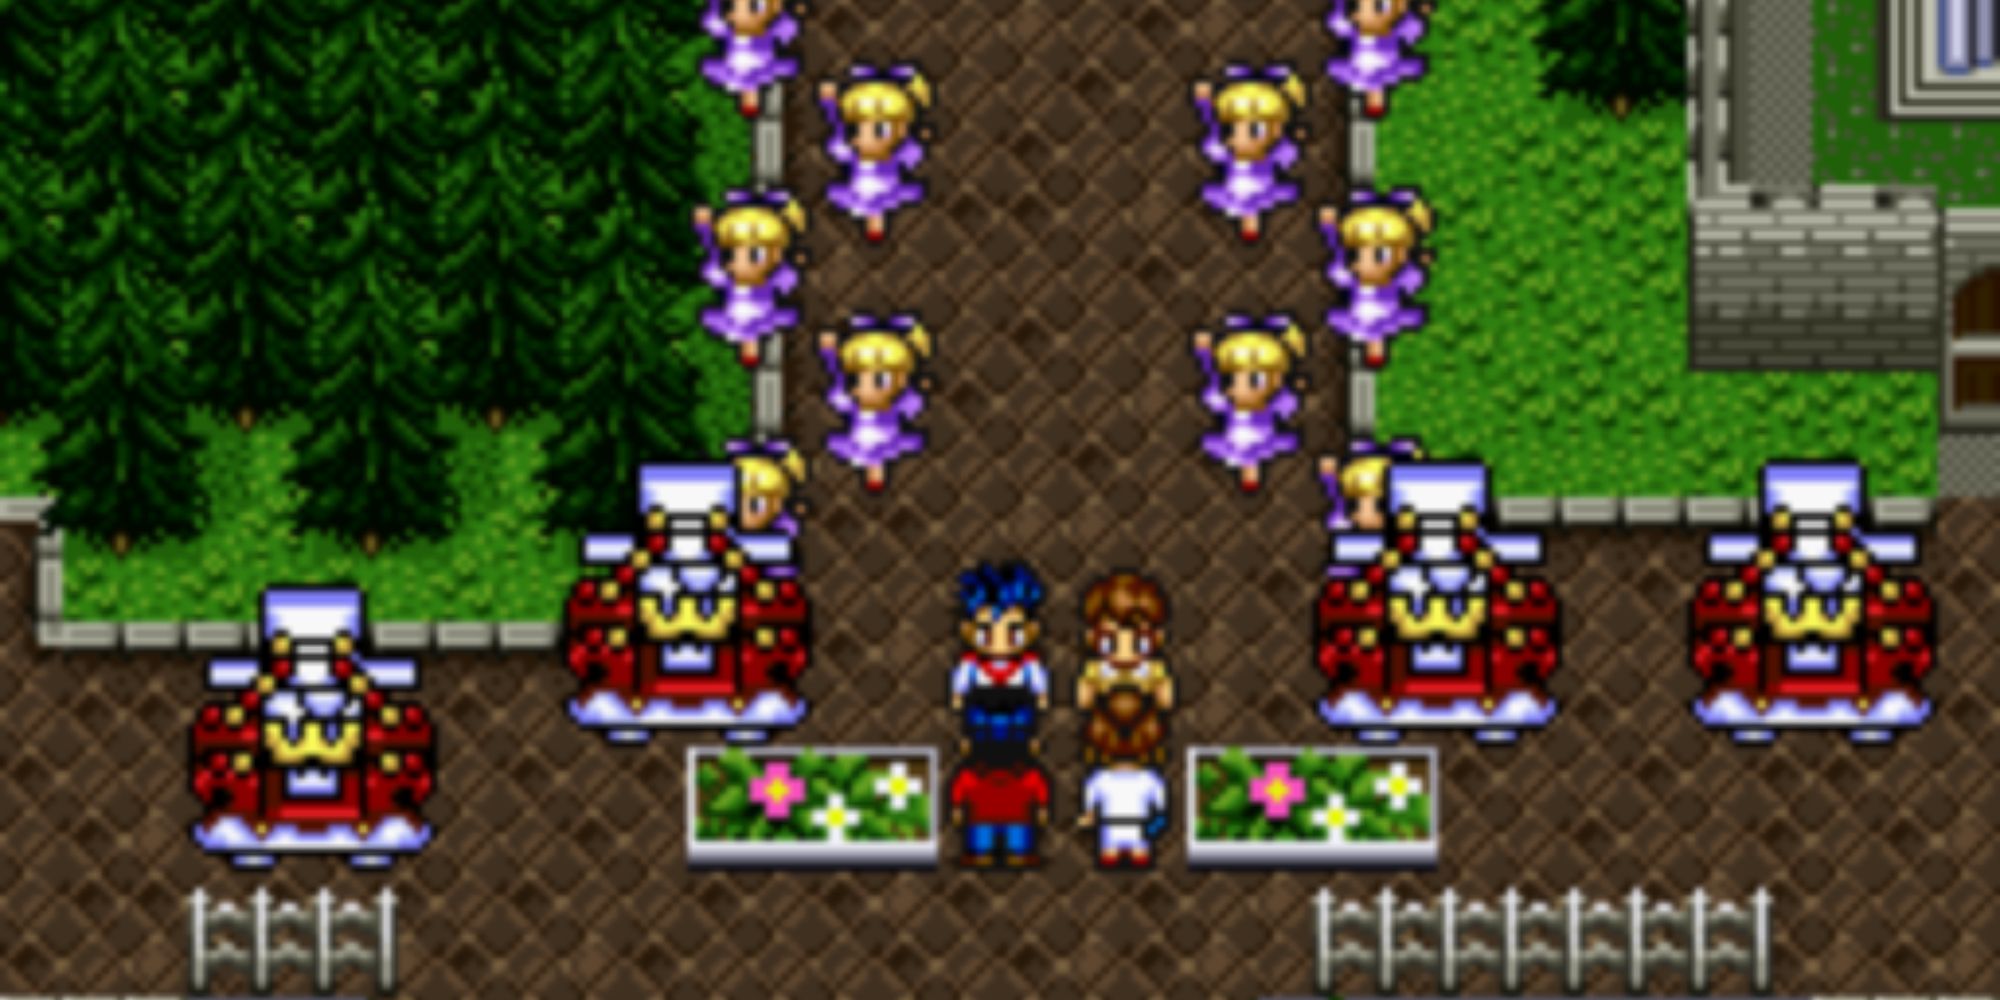 Players entering Verne World in an overworld